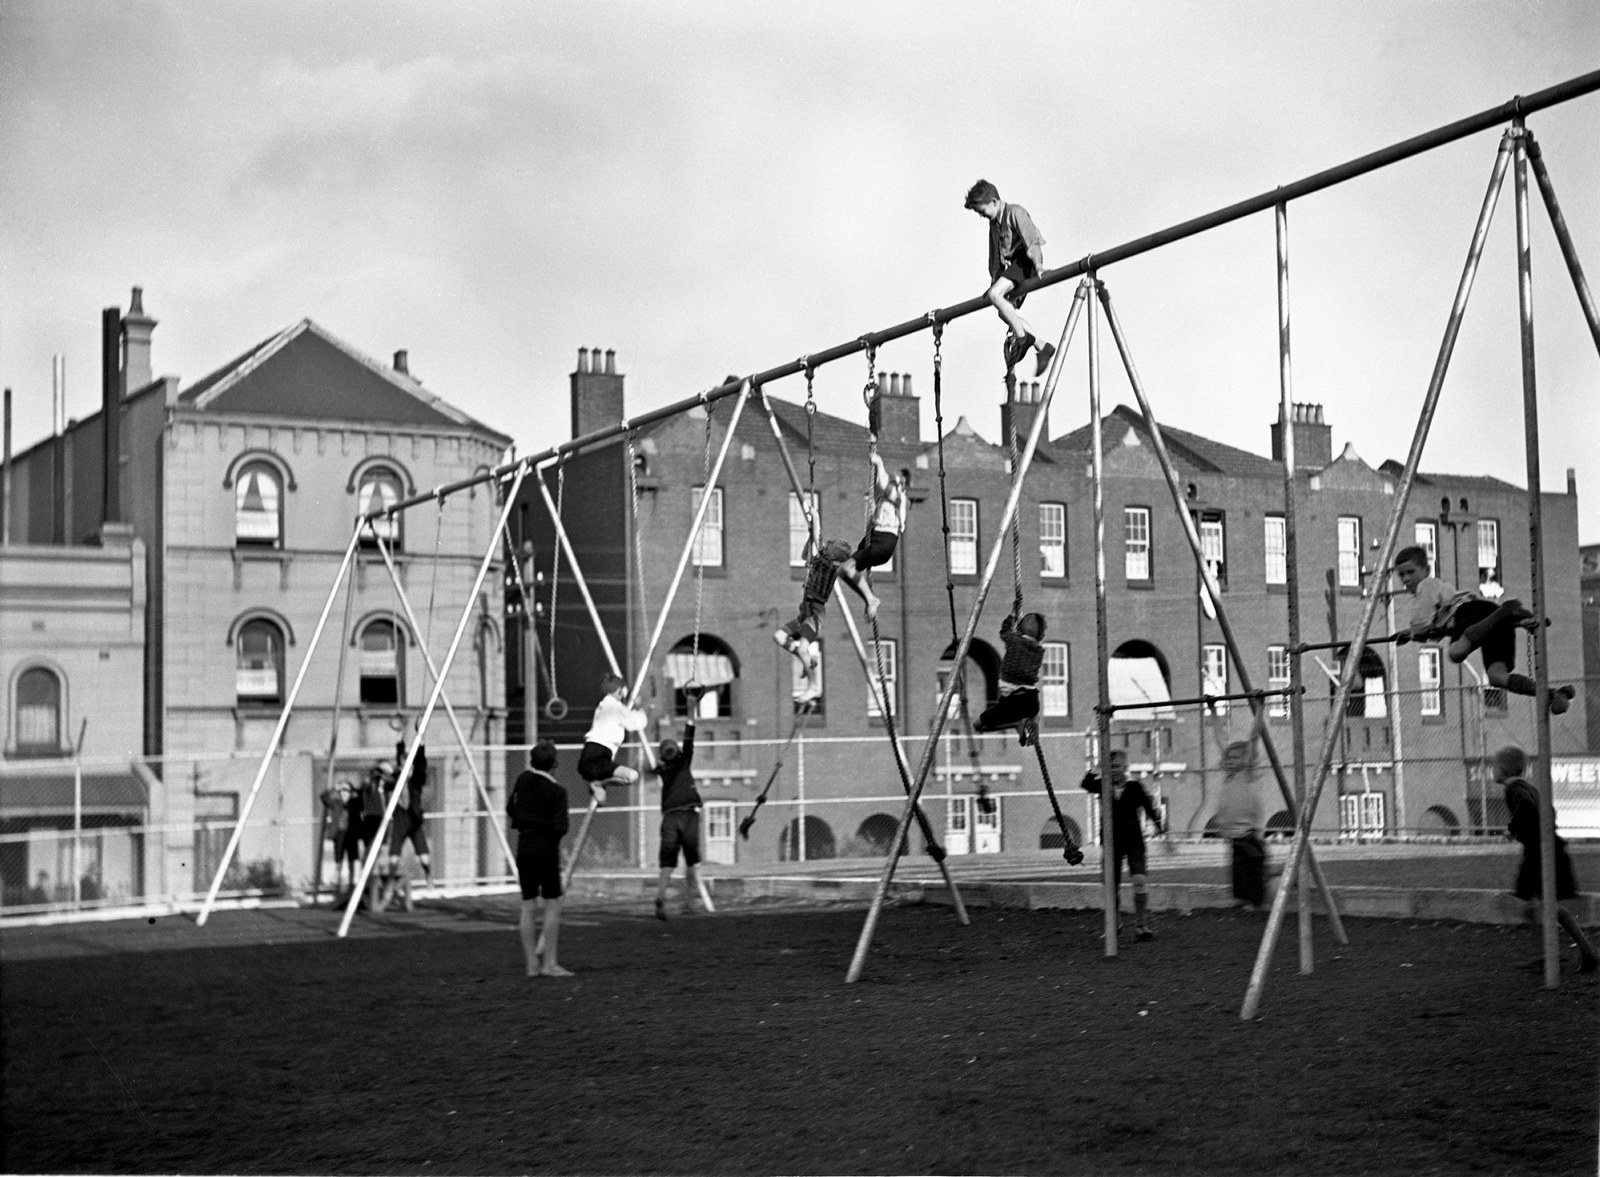 Black and white photo of children playing on equipment.